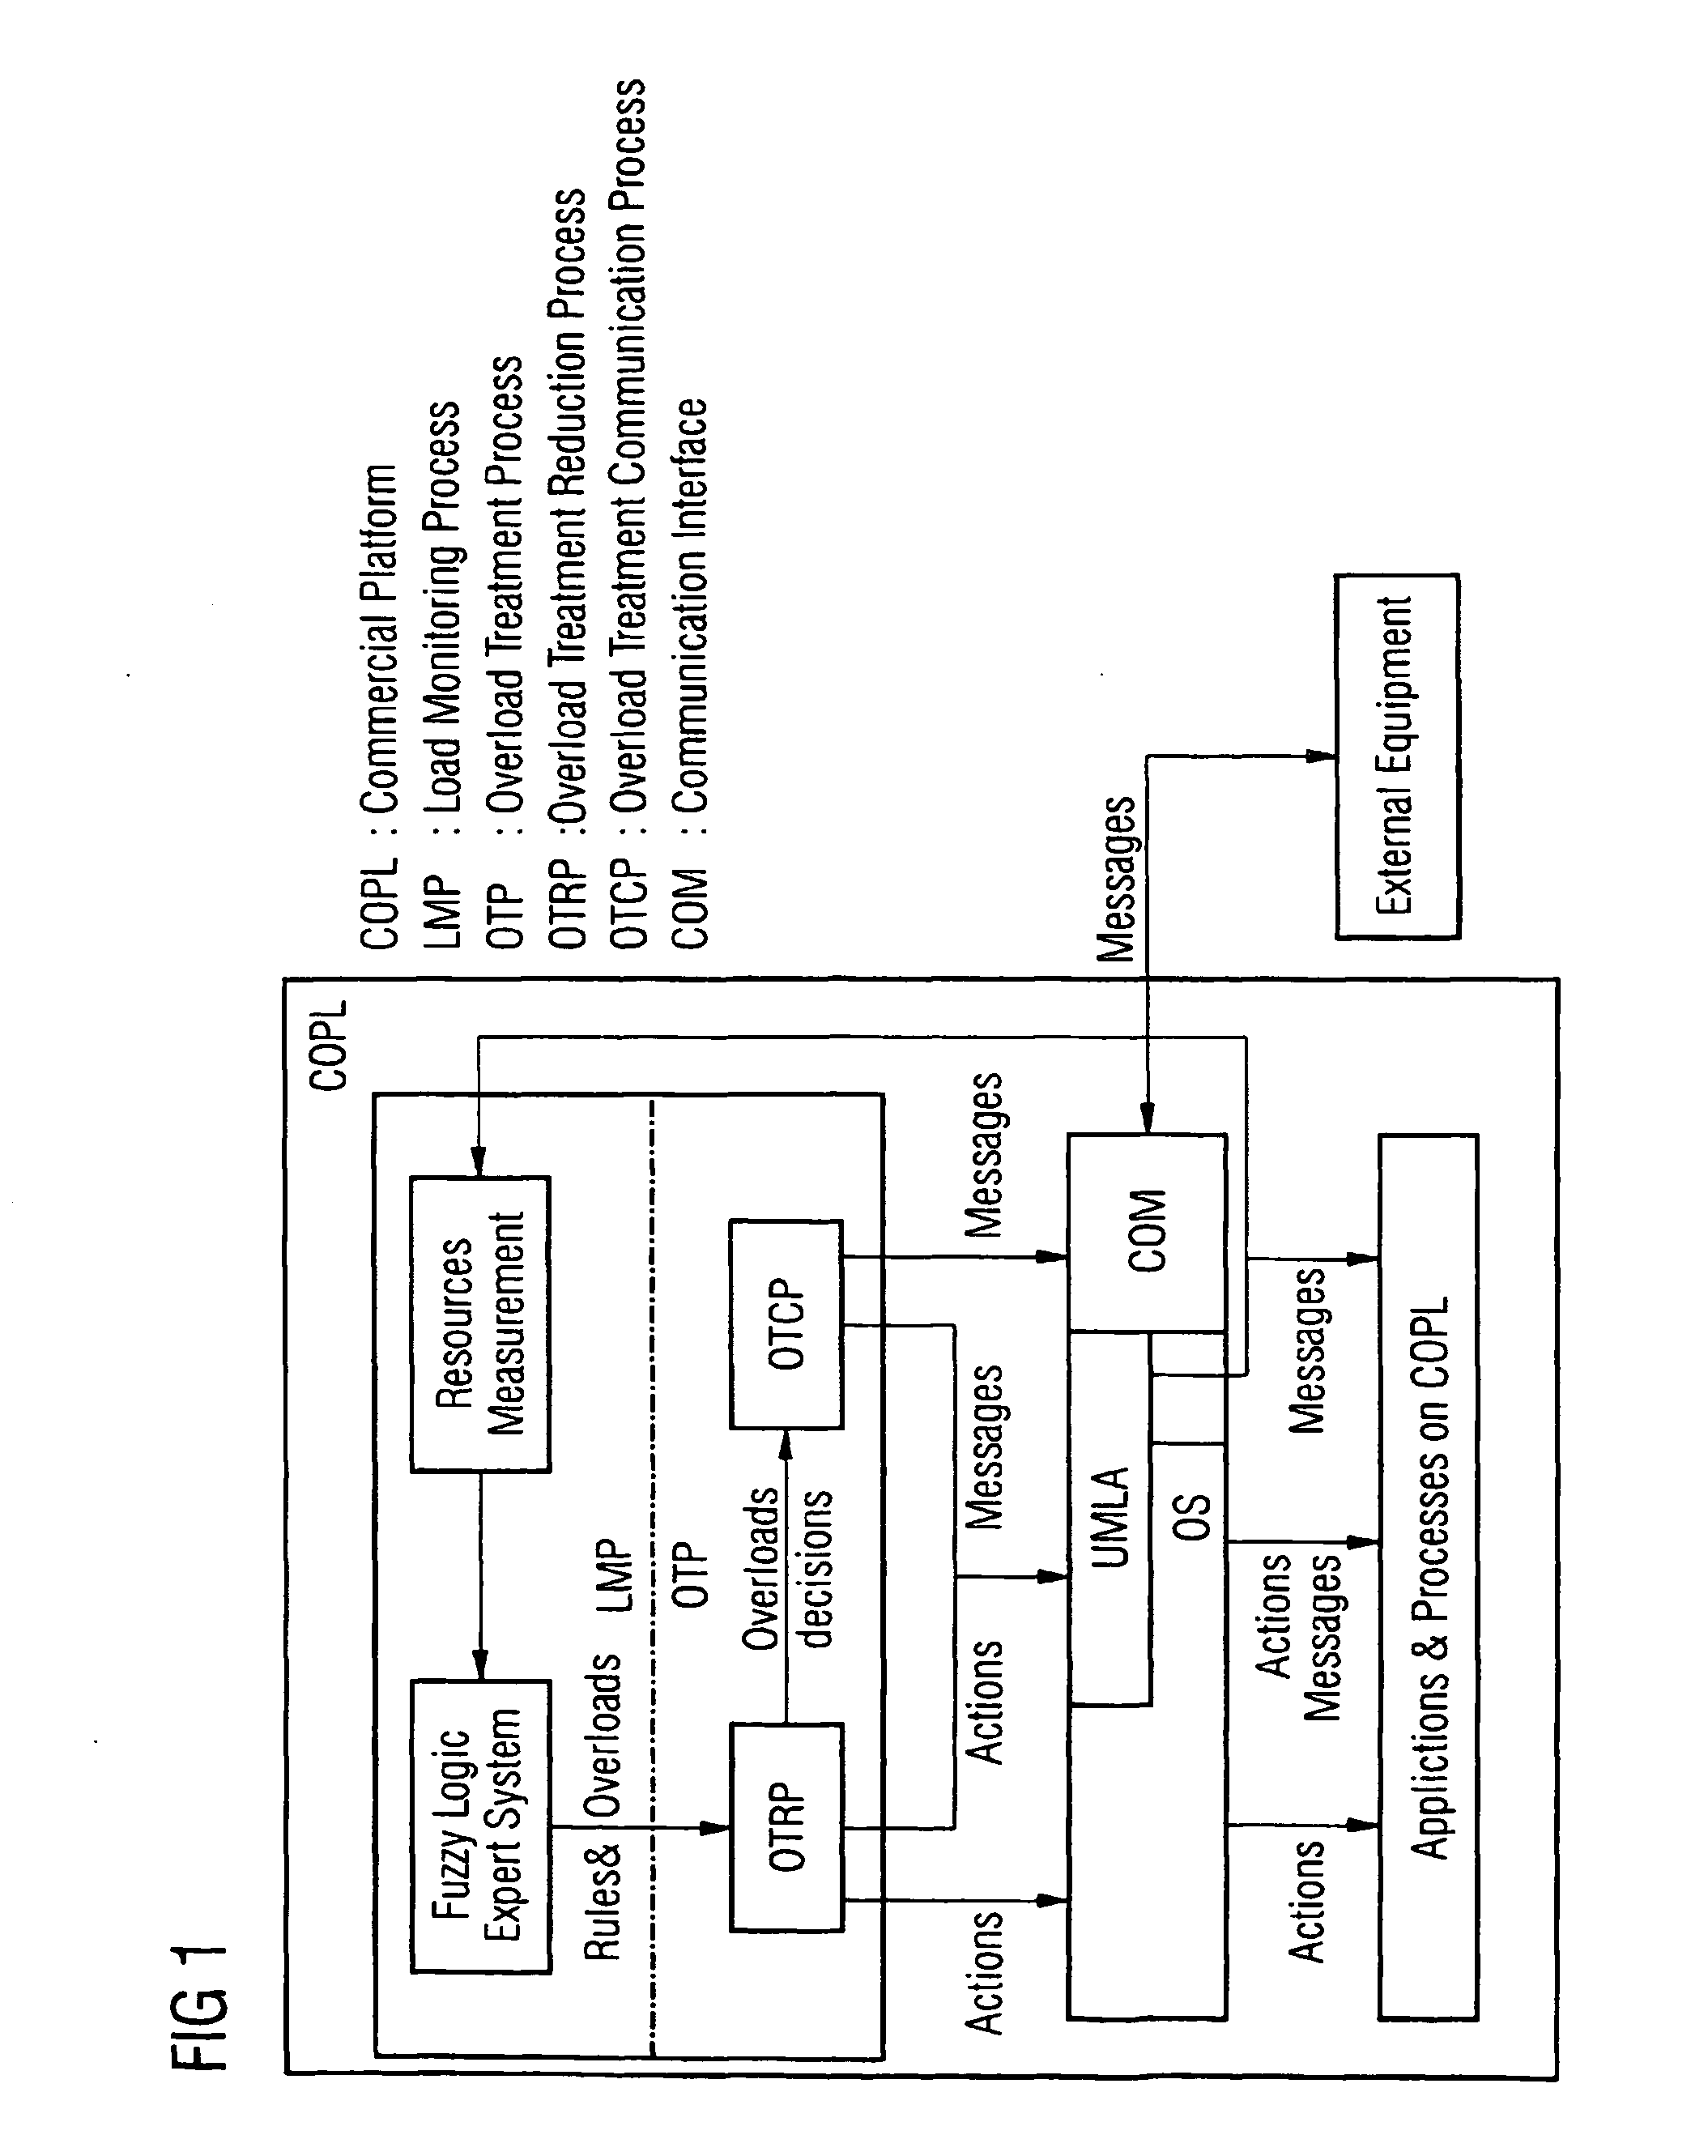 Fuzzy logic based intelligent load control for multimedia and telecommunication systems